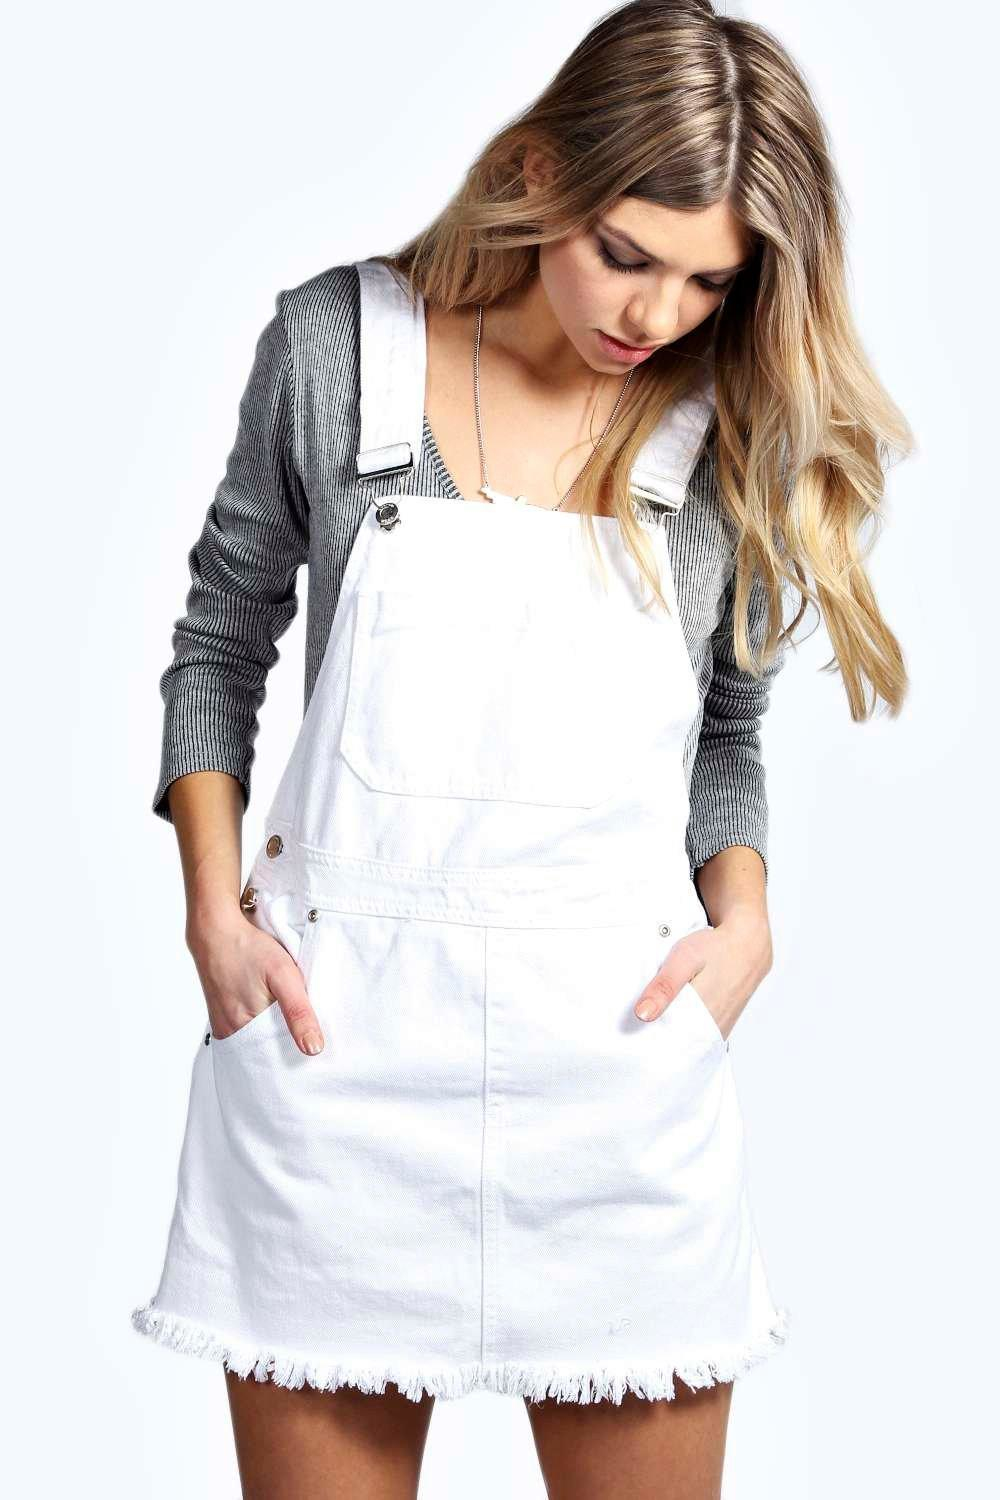 cases 11 ee iphone Denim Pinafore Daisy in Boohoo White Dress White Dungaree